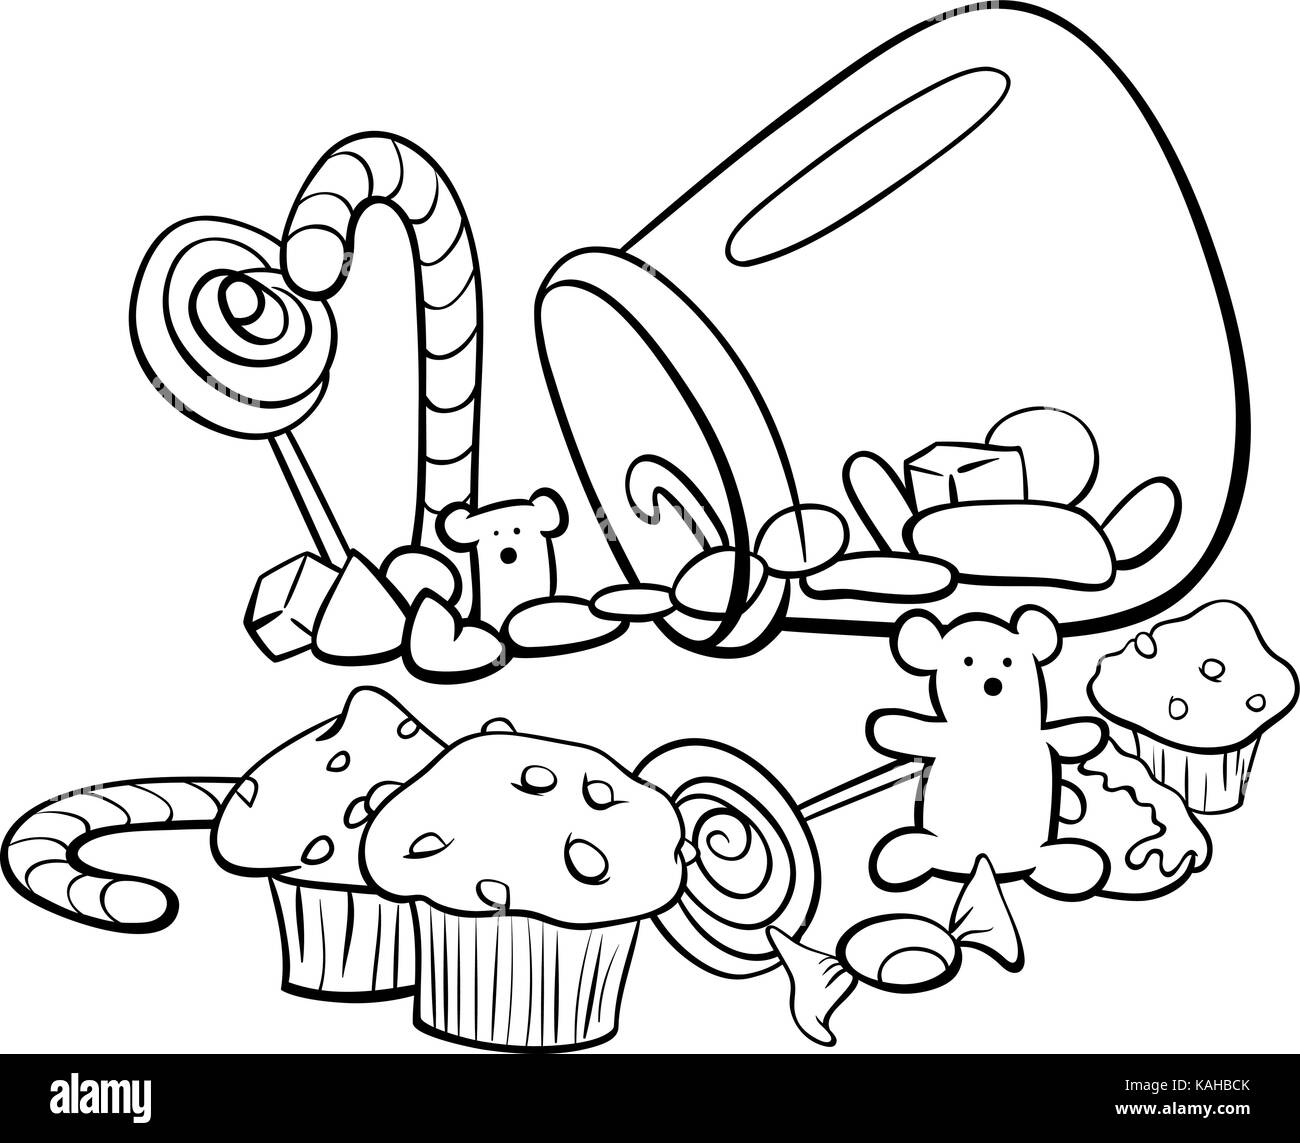 Black and White Cartoon Illustration of Sweet Food like Candy or Cakes Coloring Book Stock Vector